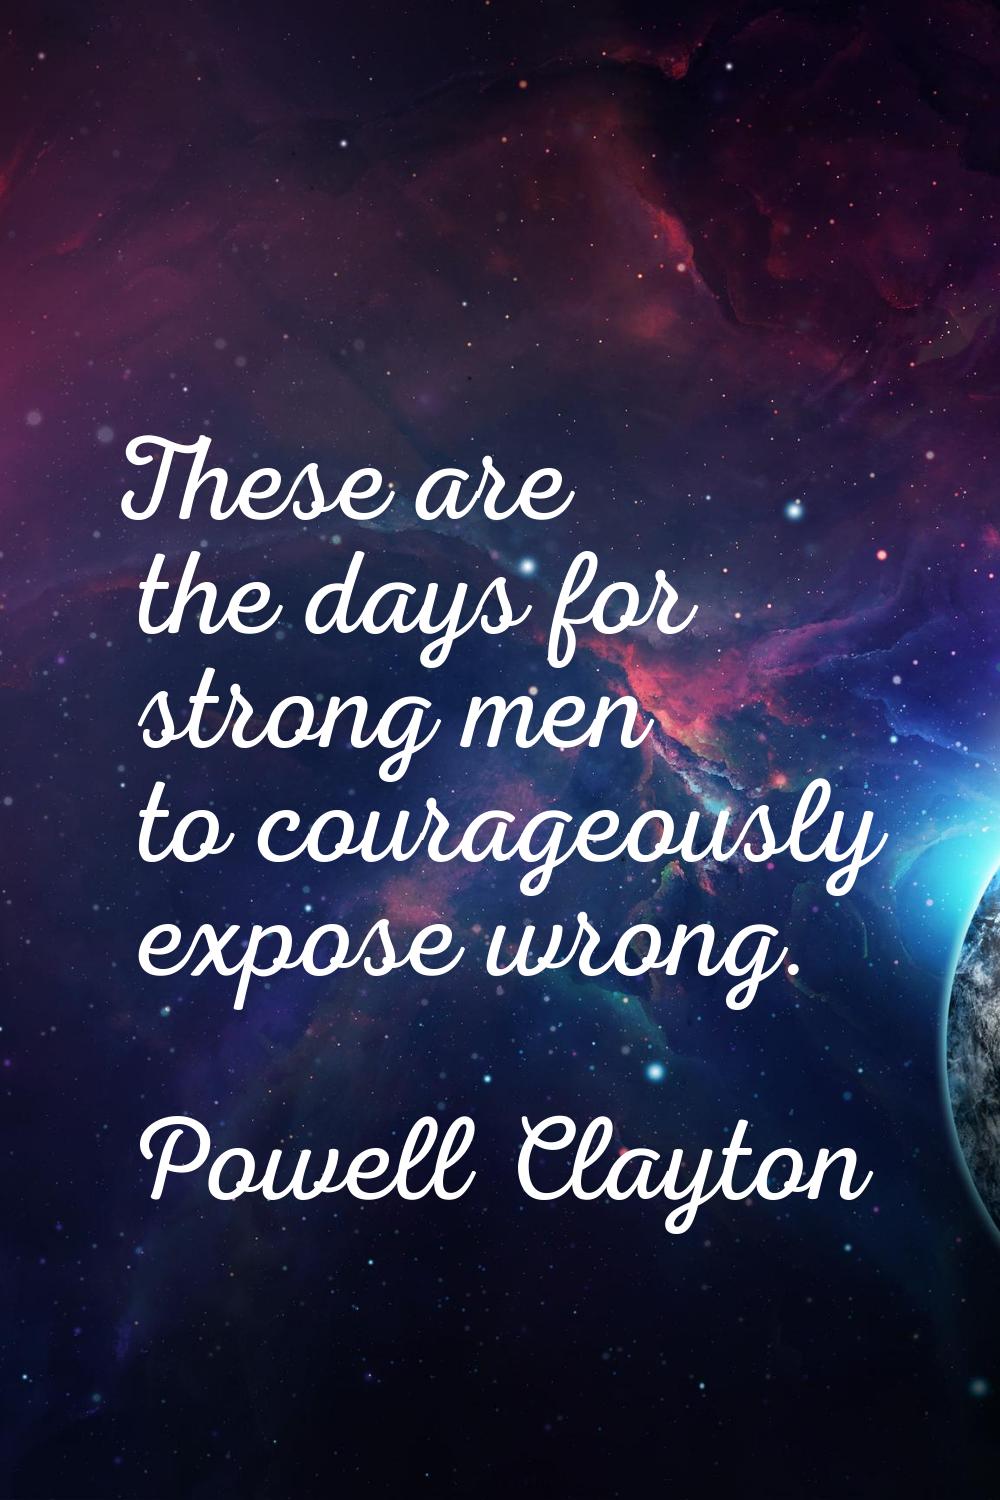 These are the days for strong men to courageously expose wrong.